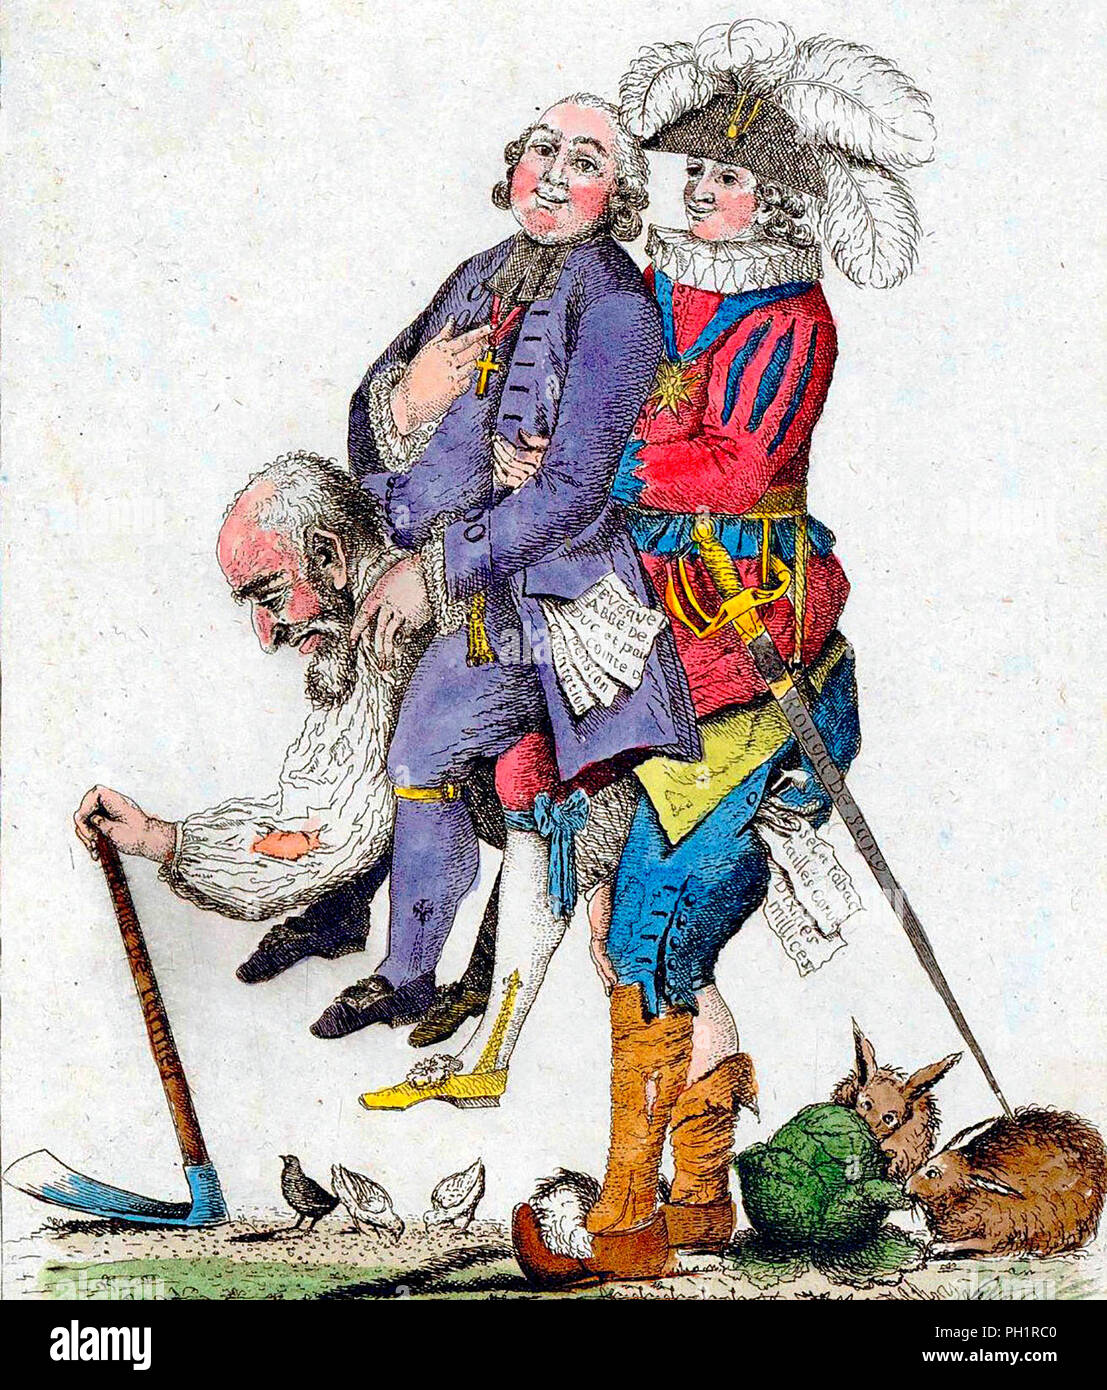 'You should hope that this game will be over soon.' The Third Estate carrying the Clergy and the Nobility on its back. France, 1789 Stock Photo